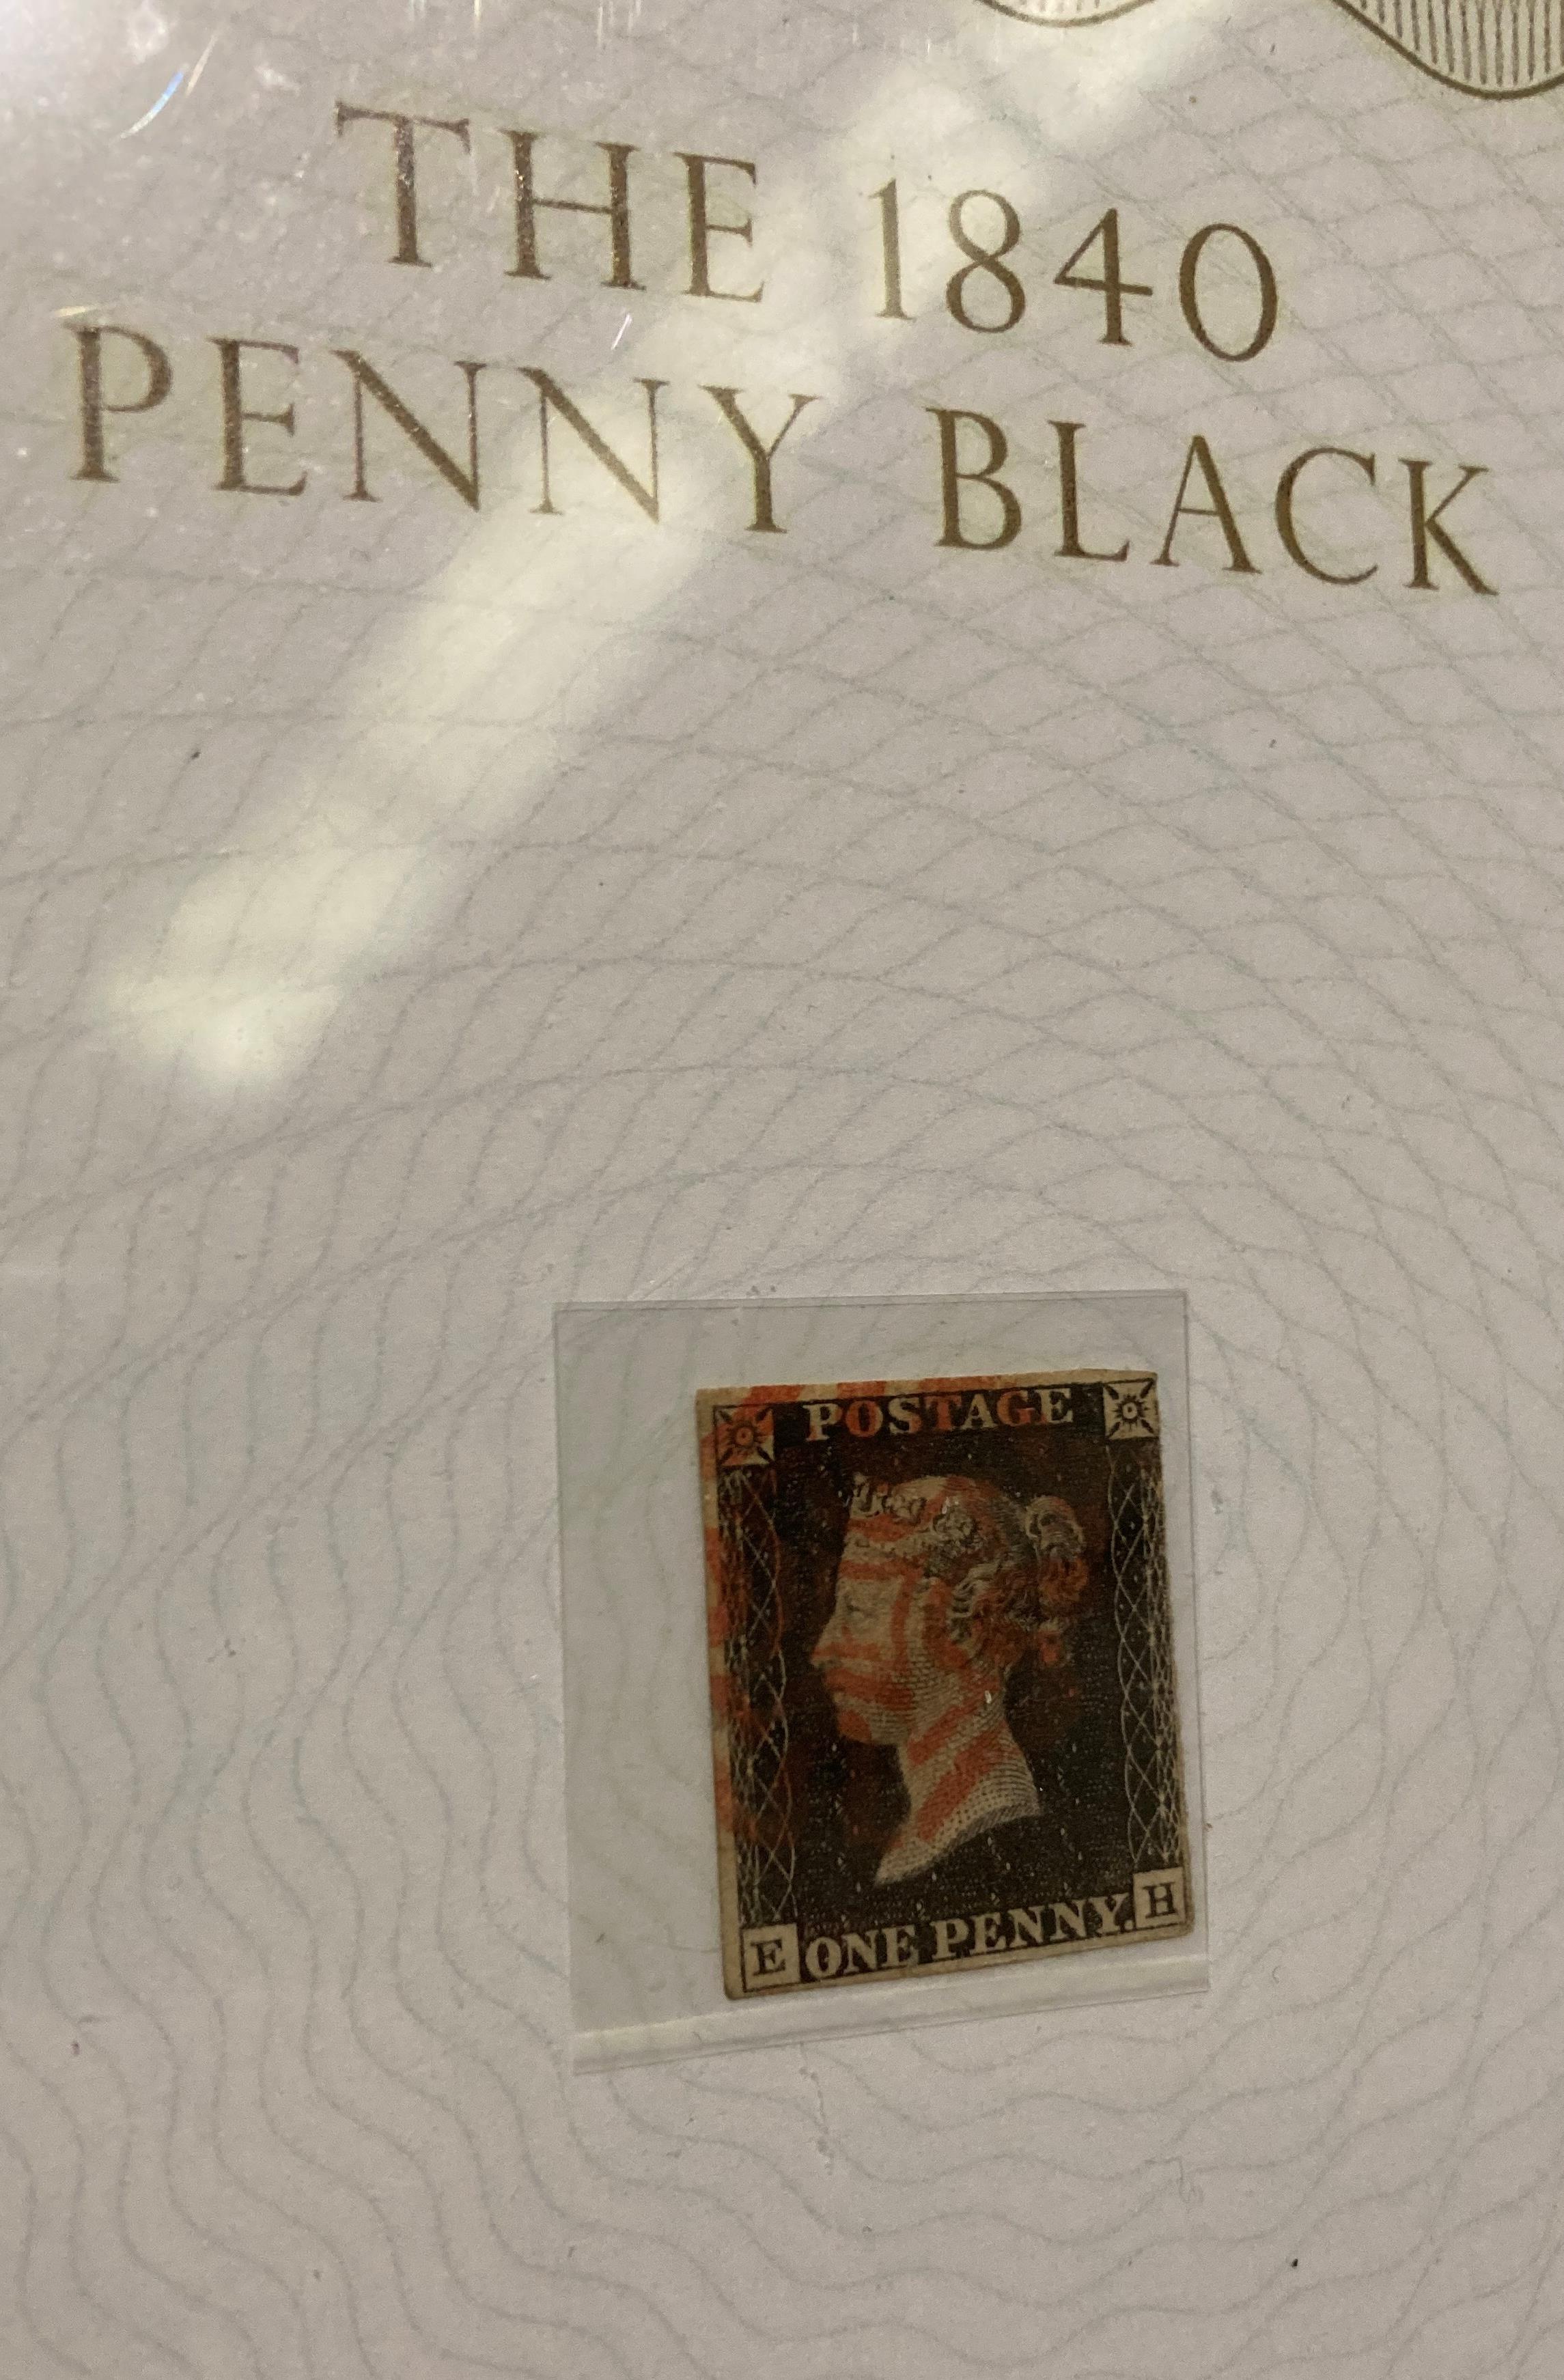 A Westminster 'The 1840 Penny Black' stamp in folder with certificate of authenticity (Saleroom - Image 3 of 4